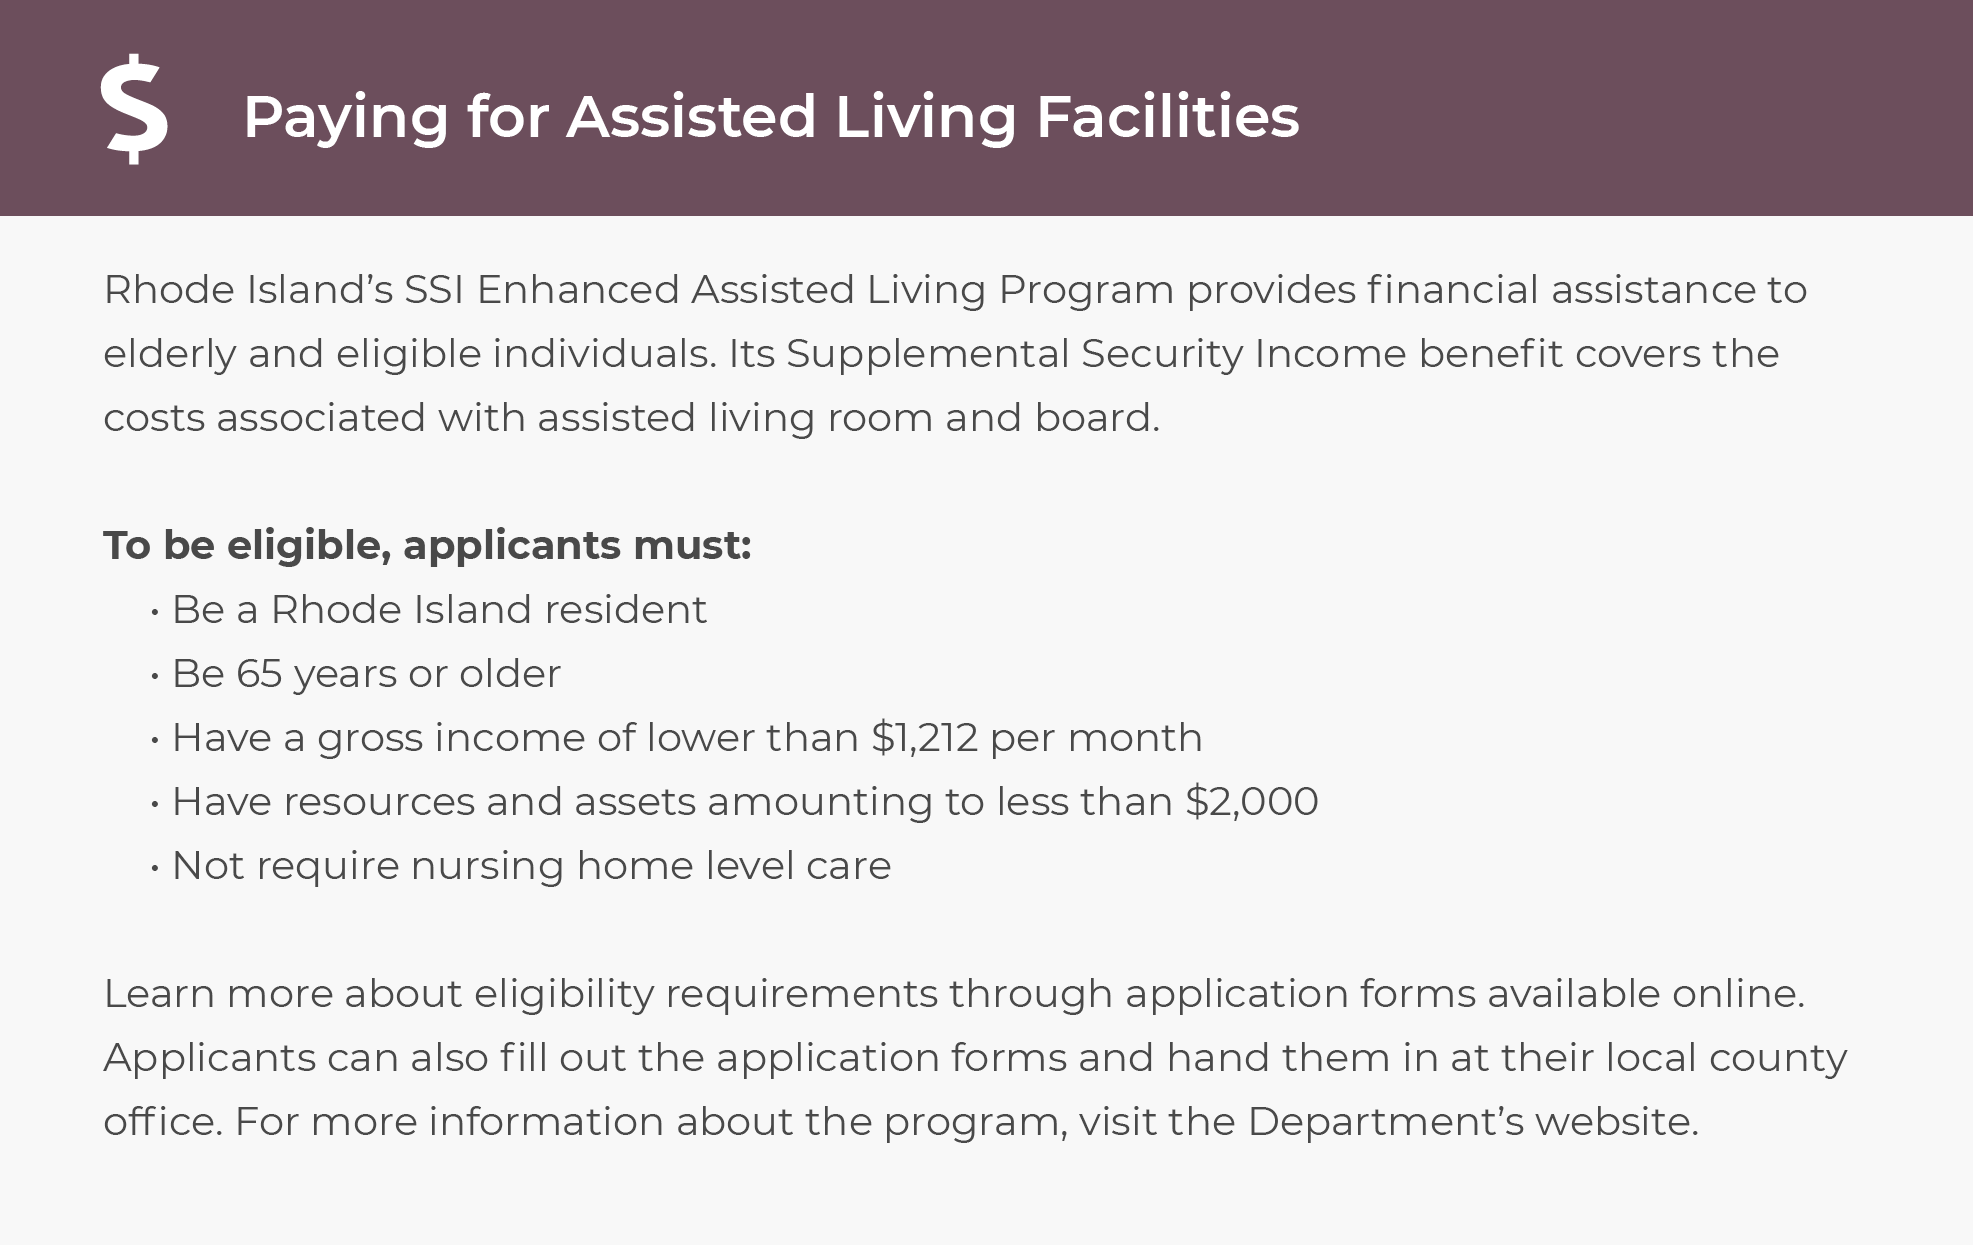 How to Get Financial Assistance for Assisted Living in RI